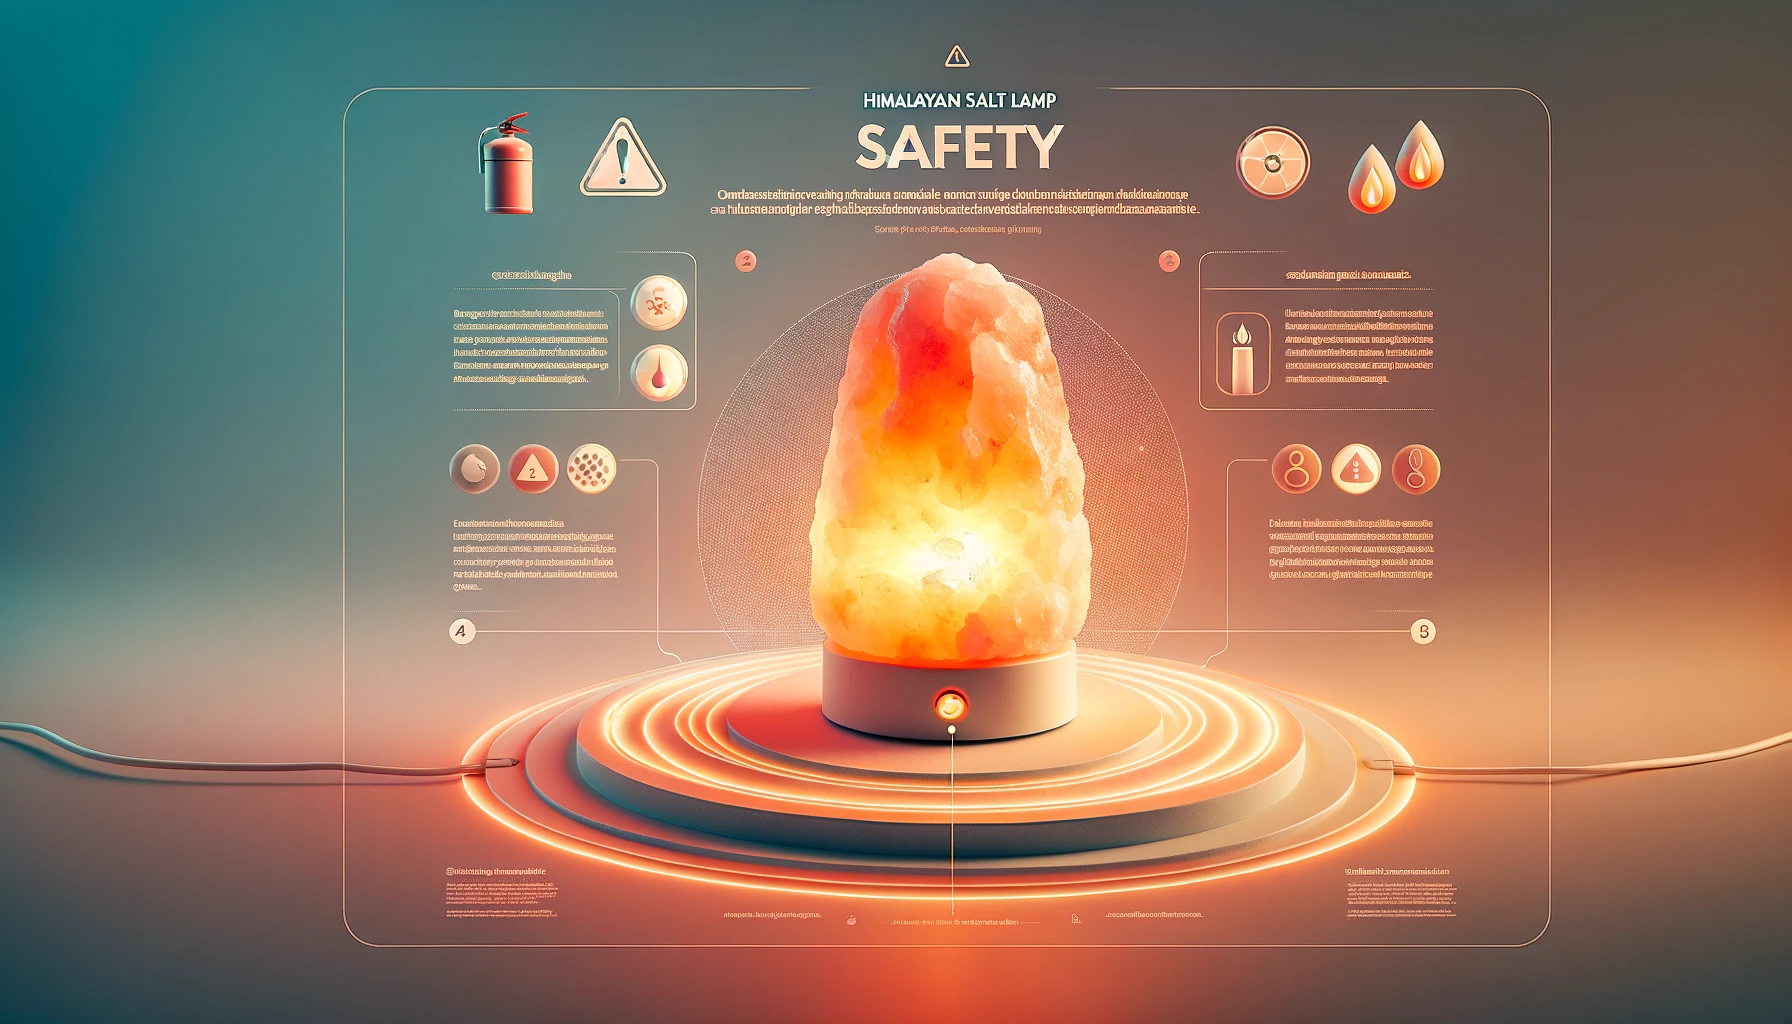 Himalayan Salt Lamp Image with Caution and Safety Signs to keep in mind